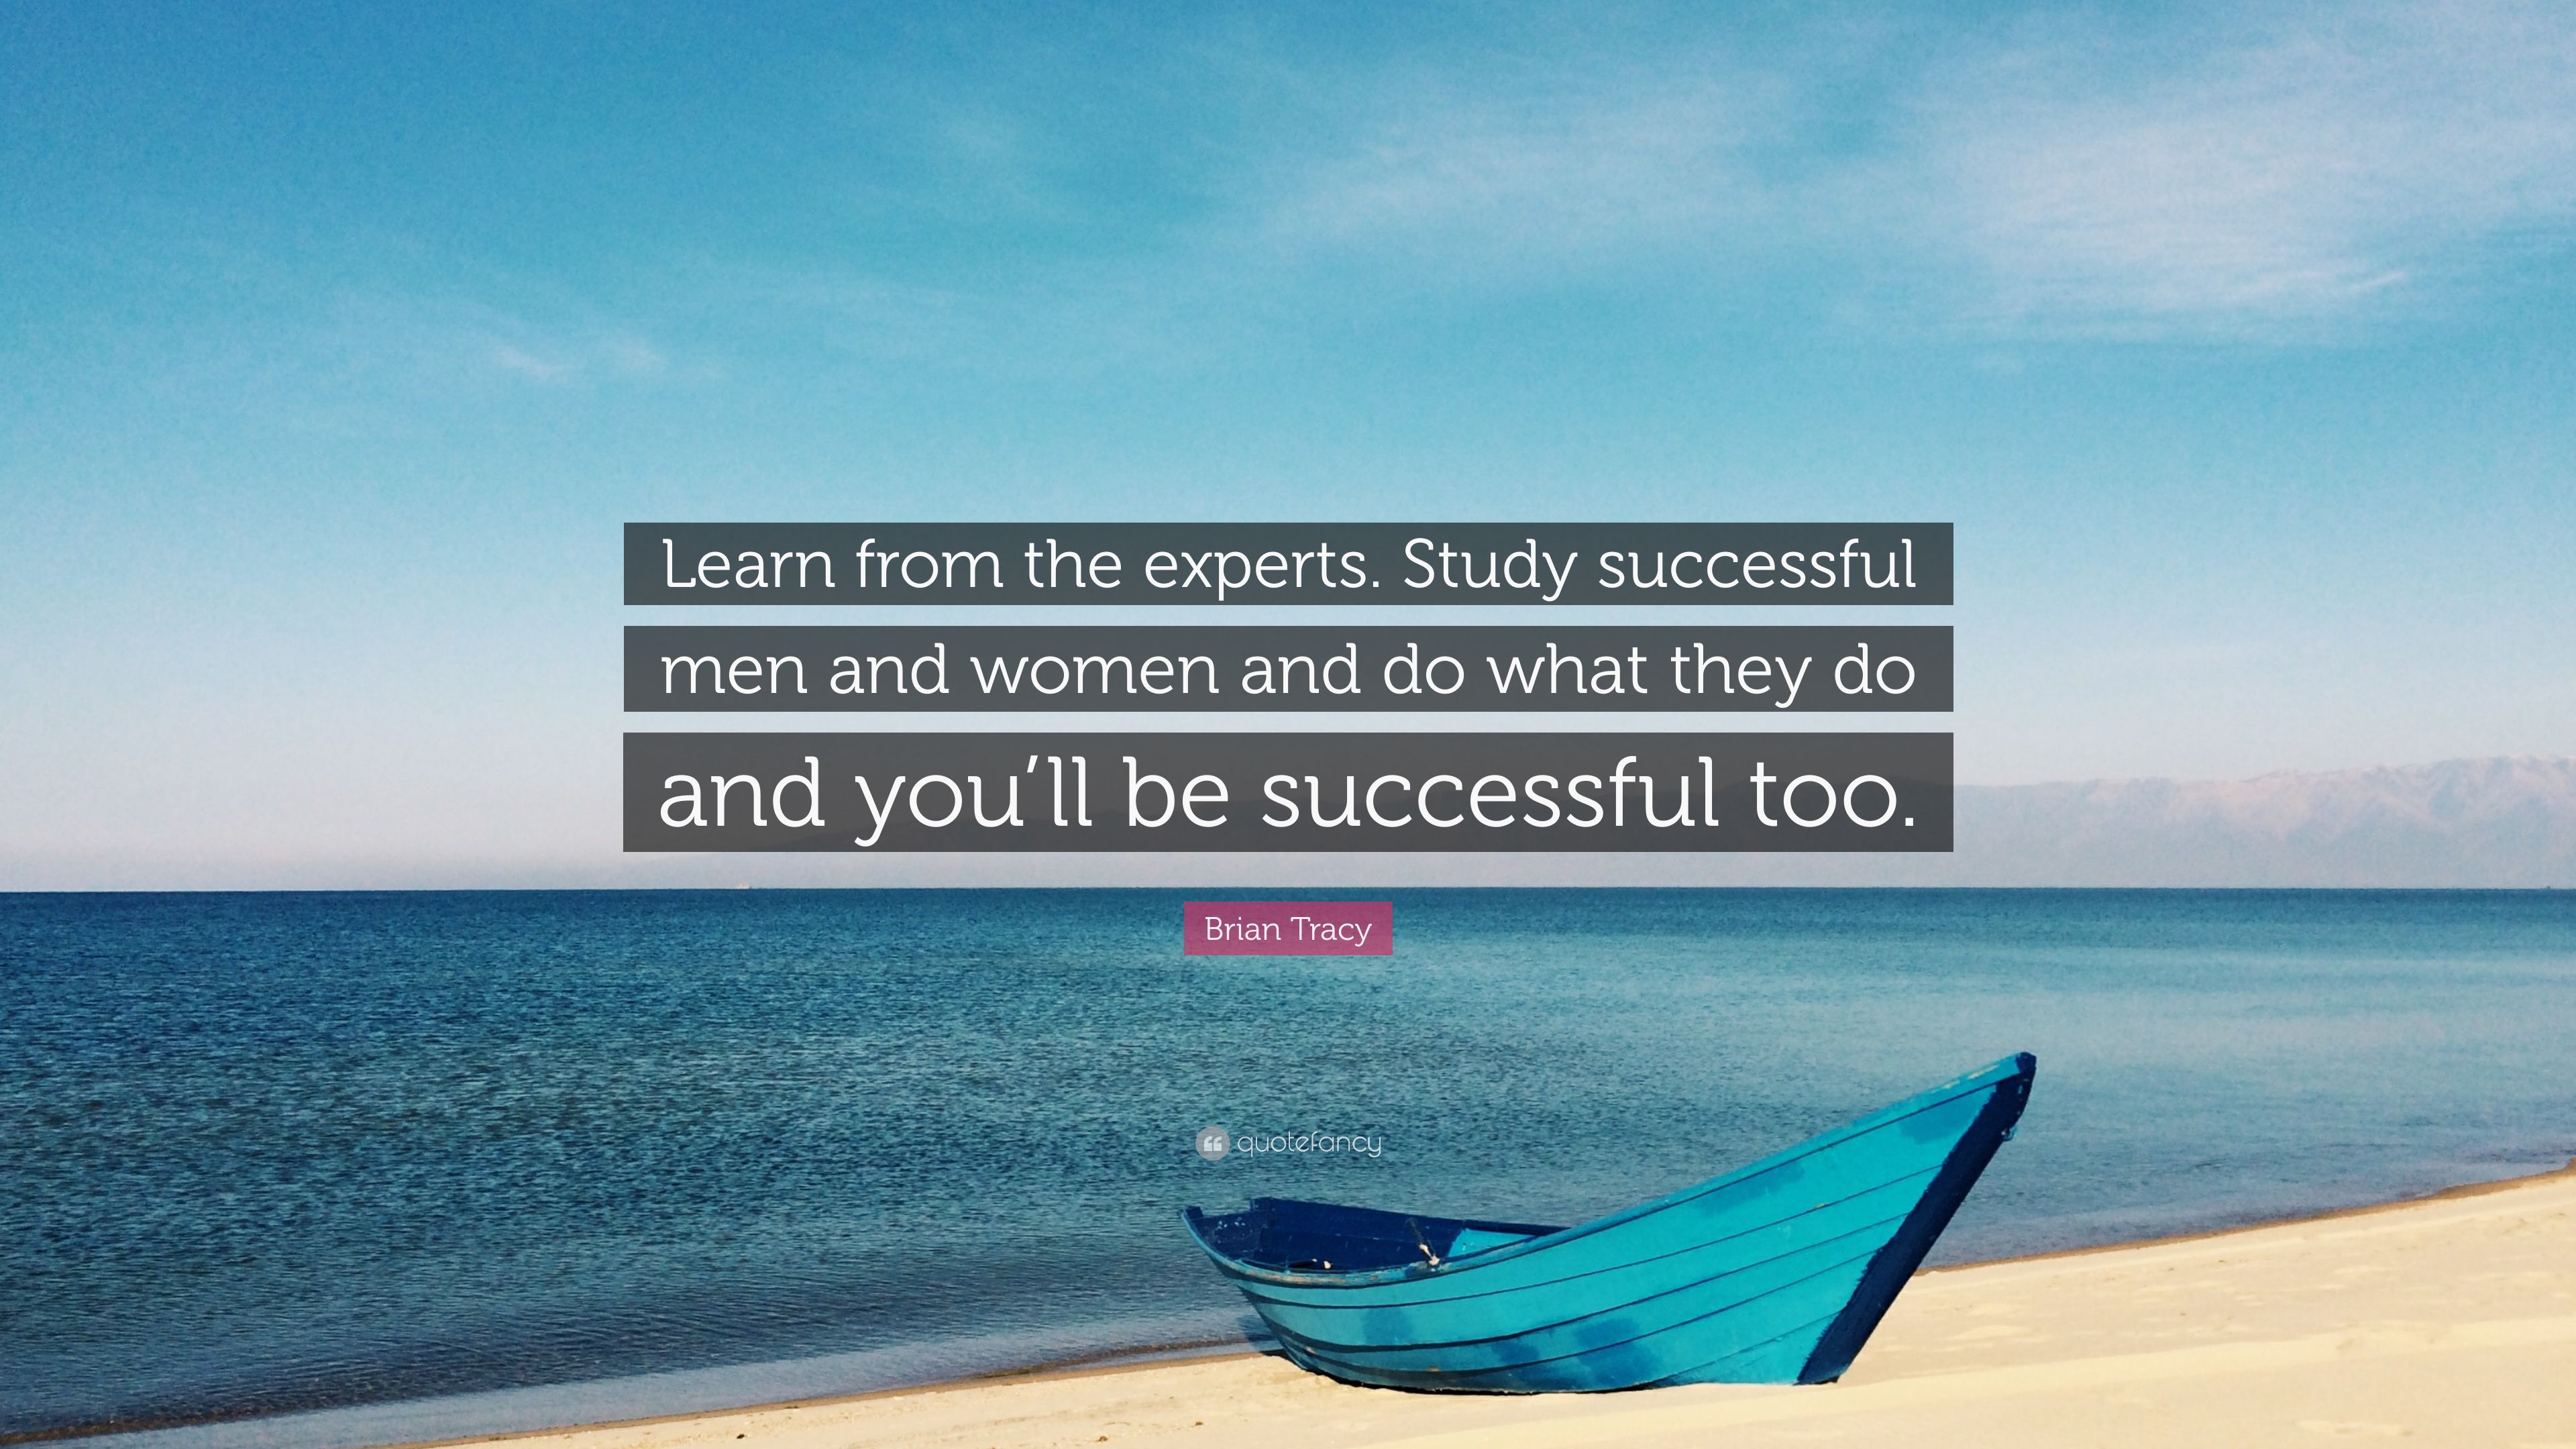 Brian Tracy Quote: “Learn from the experts. Study successful men